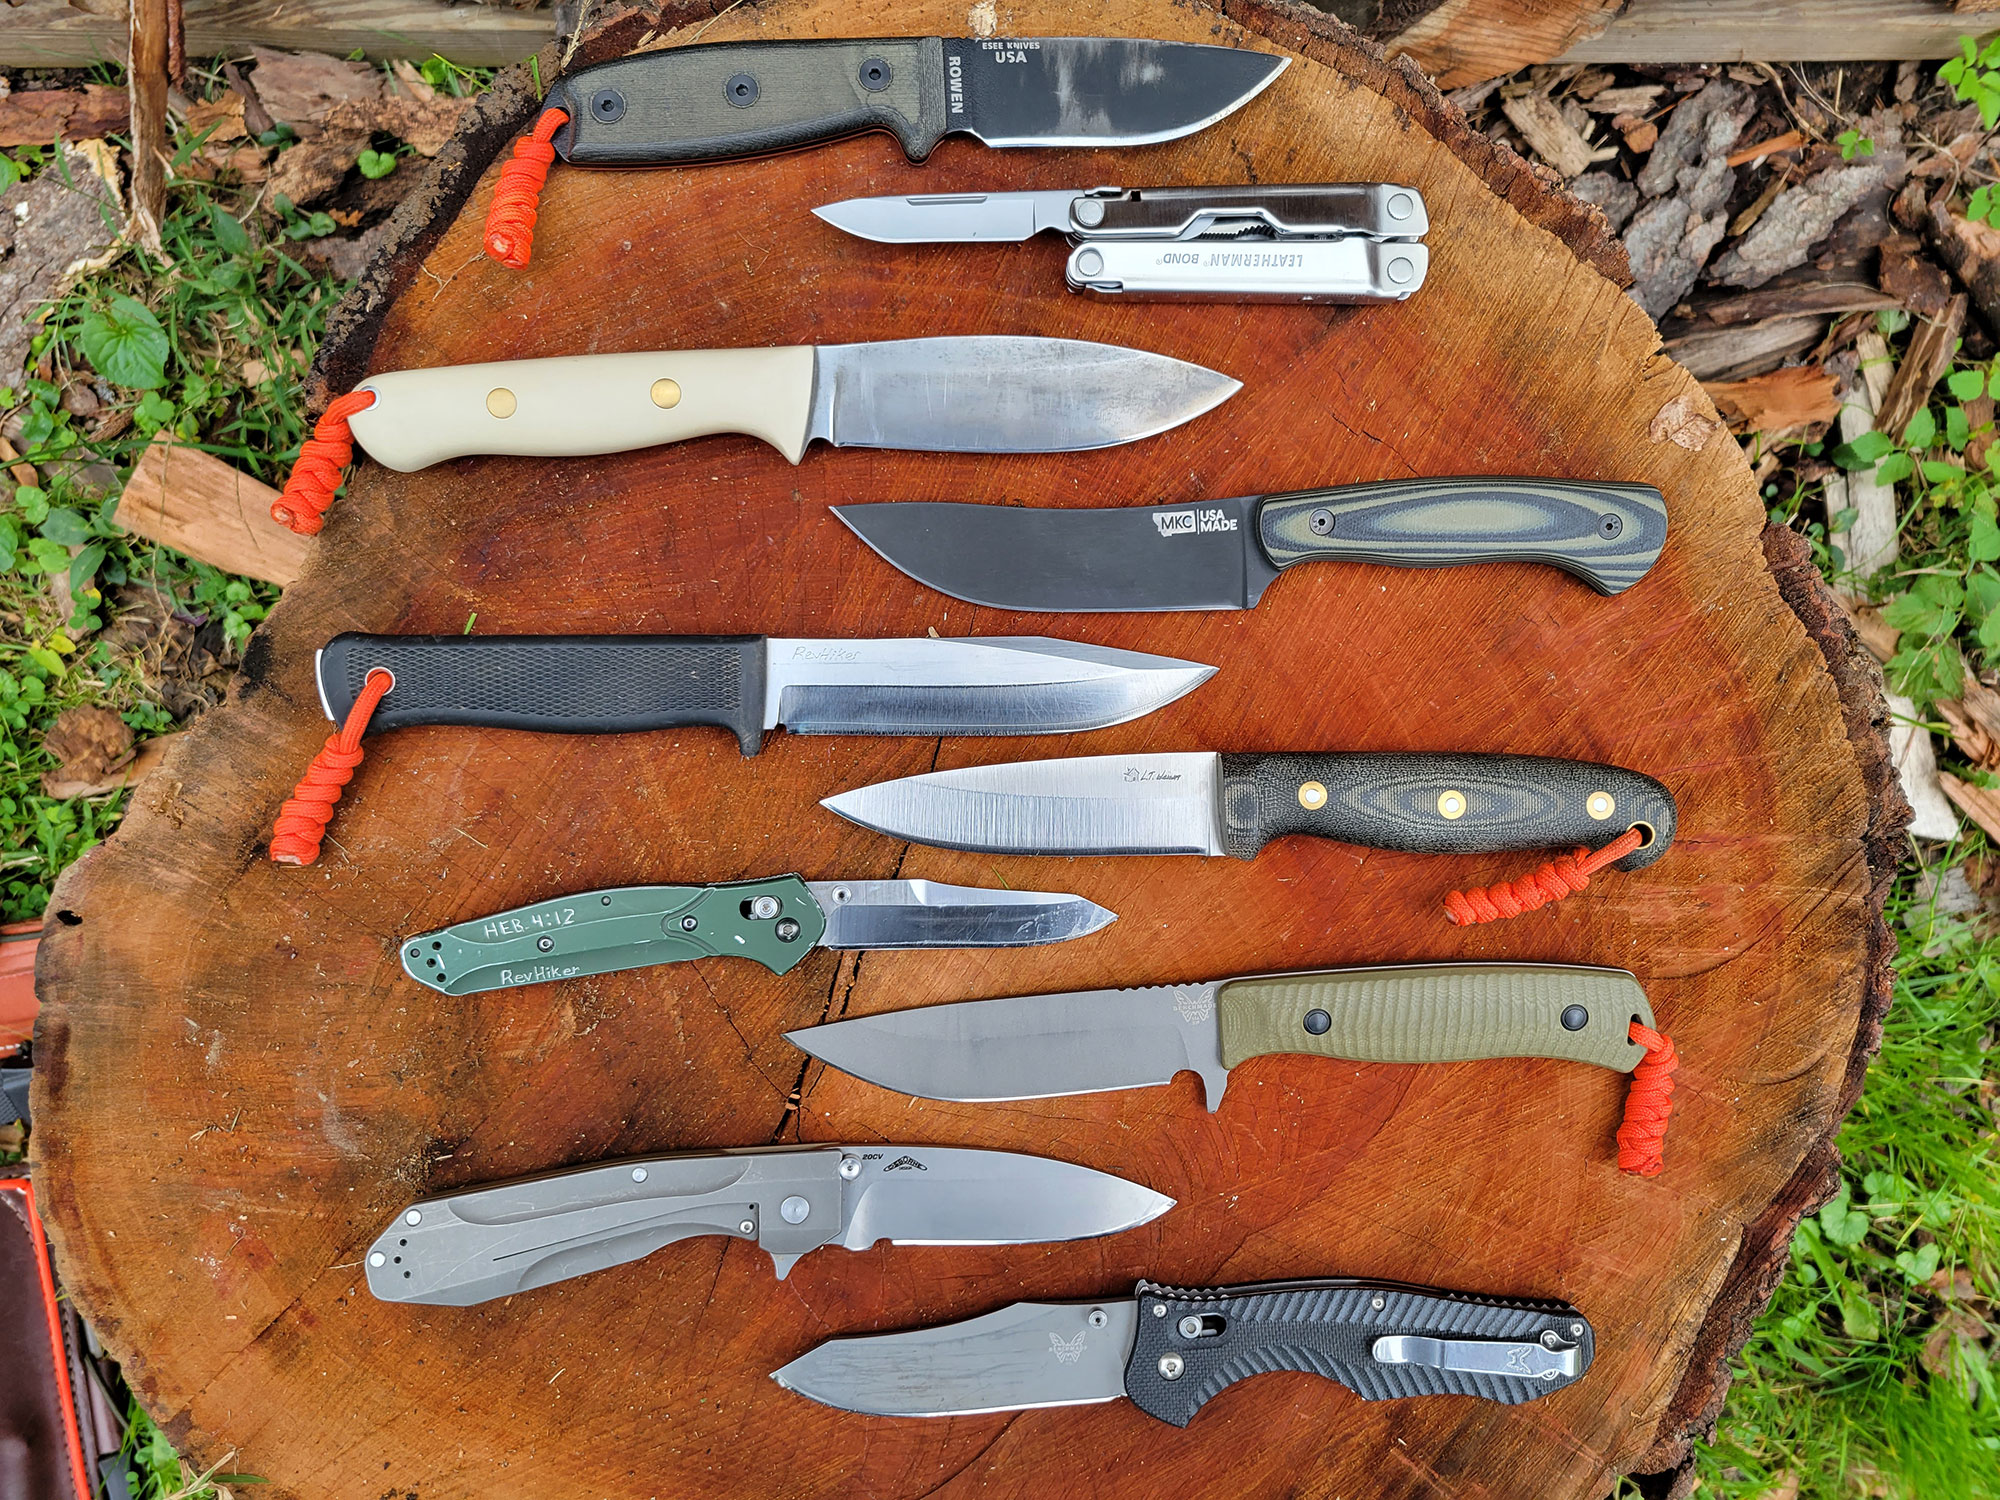 Benchmade takes its knifemaking skills to the kitchen - Acquire